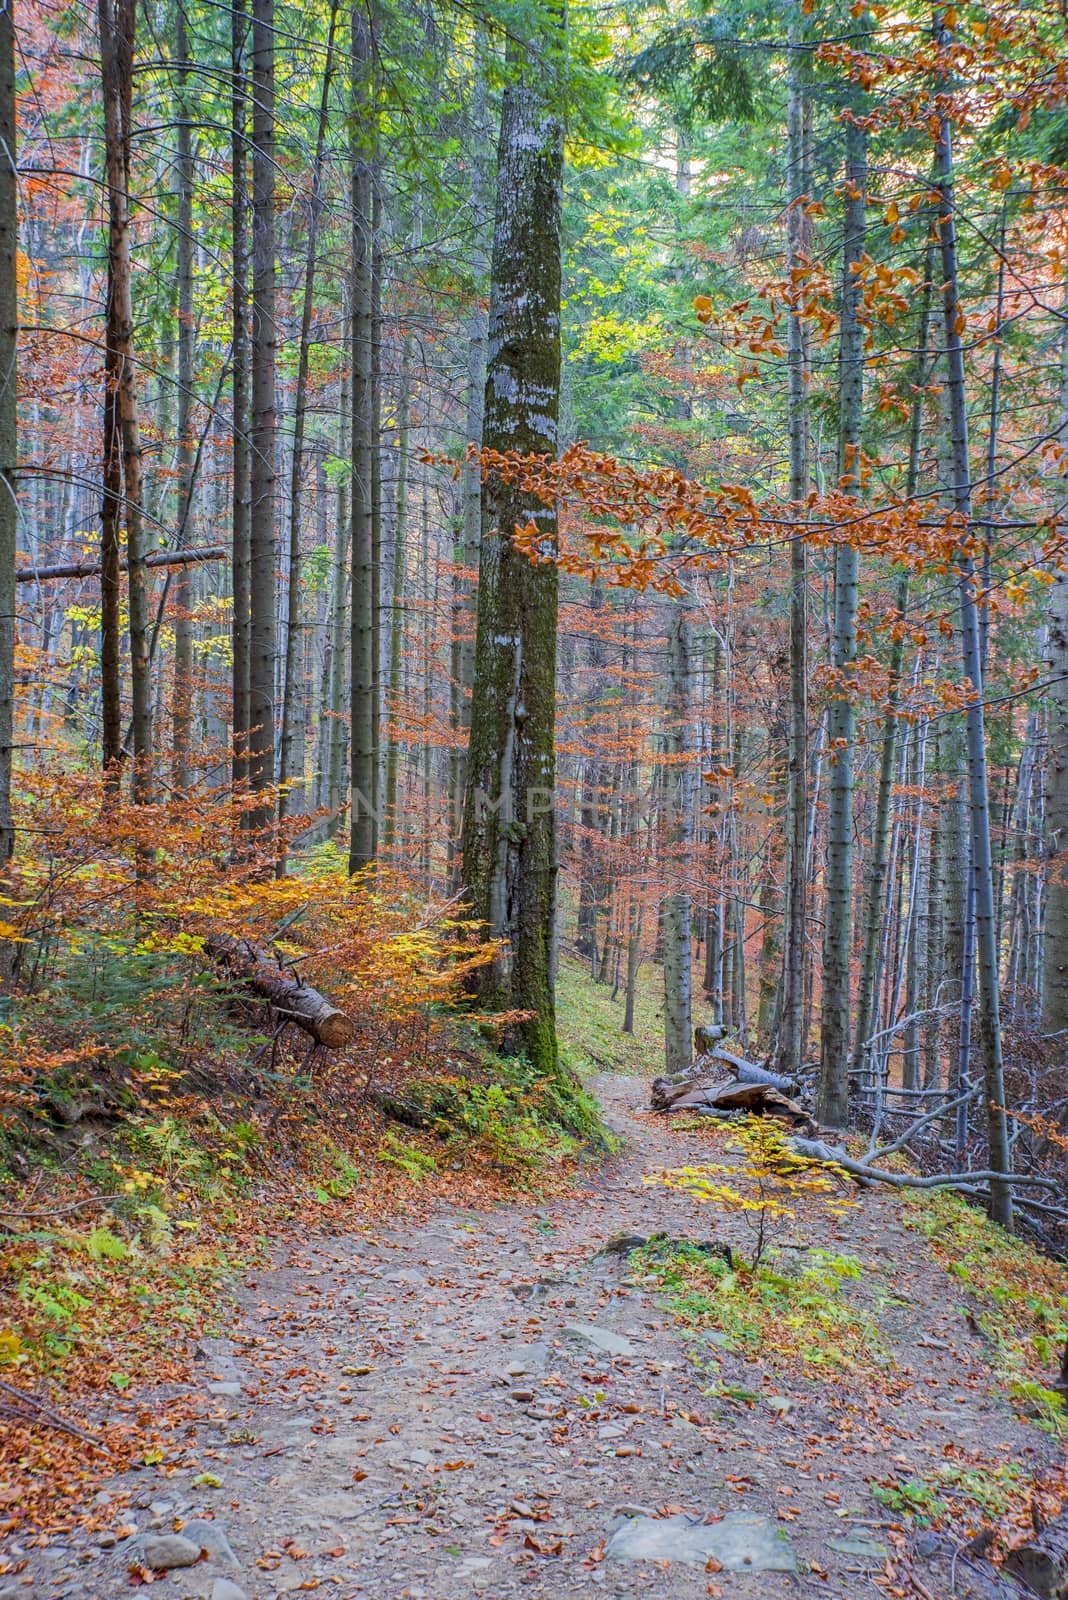 Mountain foot path in autumn forest, colored foliage